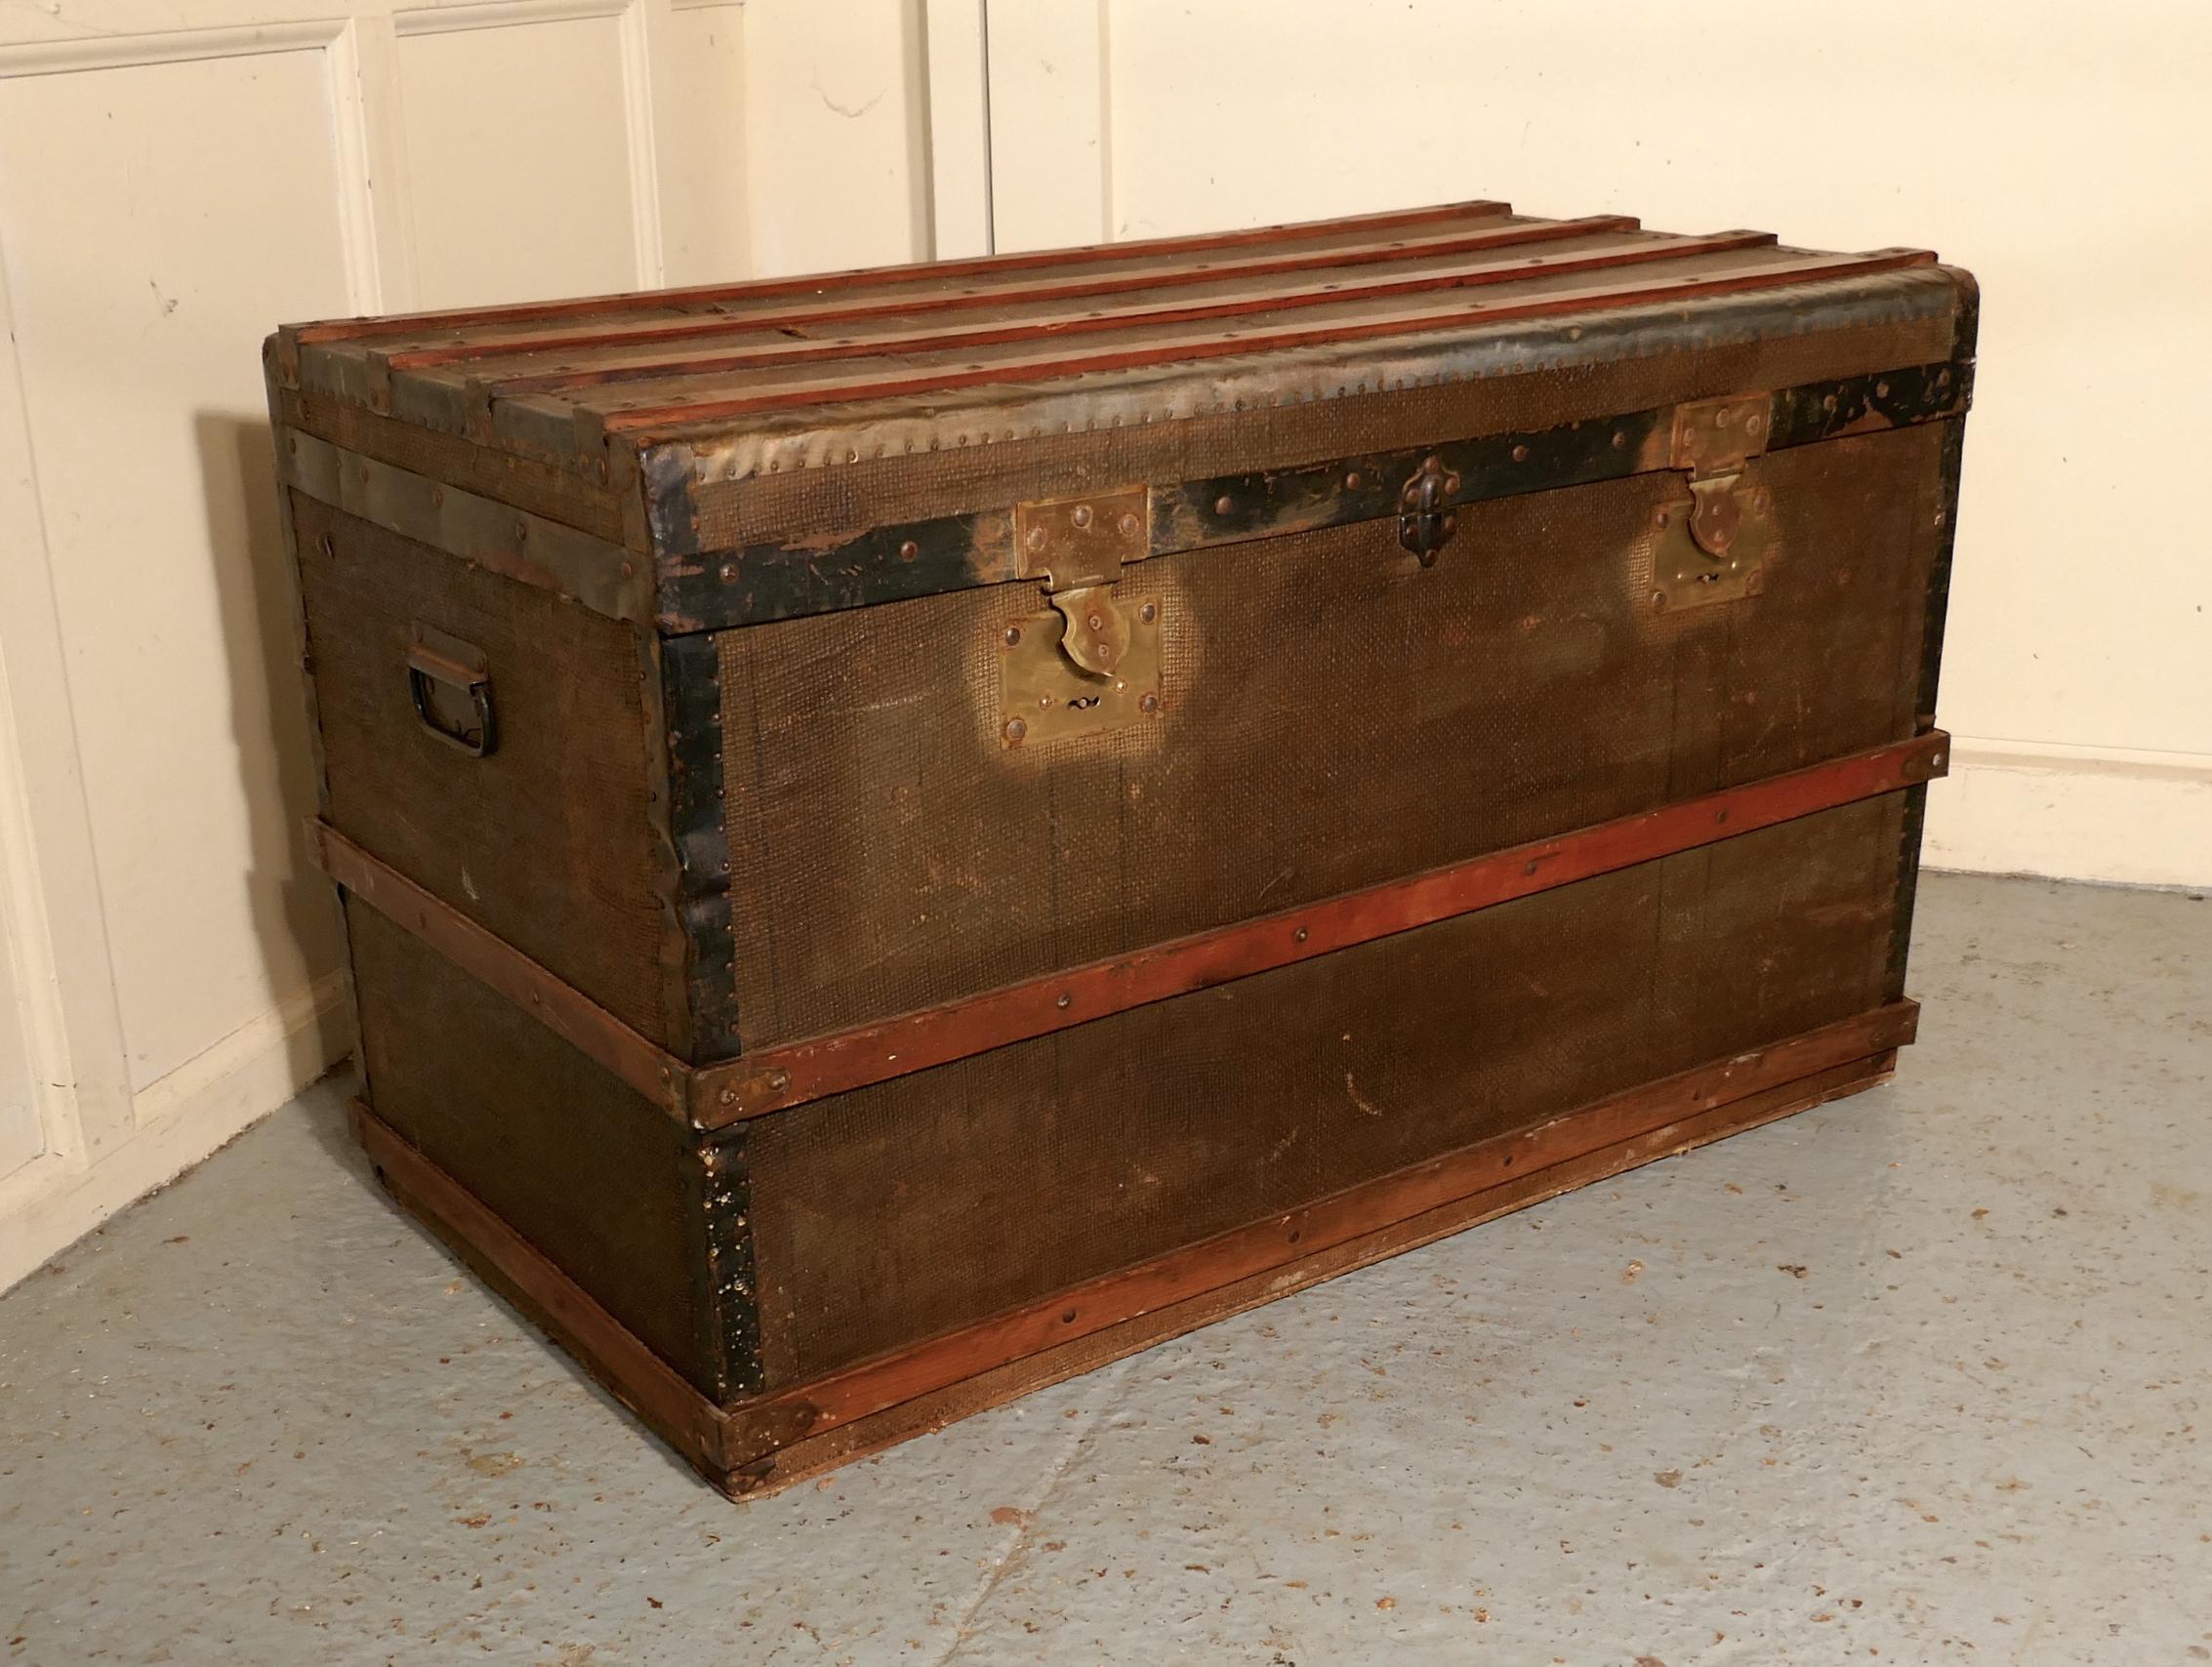 A Vintage Brass and Bound Canvas Travel Steamer Trunk

A very useful decorative suitcase or travel trunk, it is lined in checked paper fabric, it has a fitted section inside with 2 removable trays at the top 
The Trunk is canvas covered, it has wood